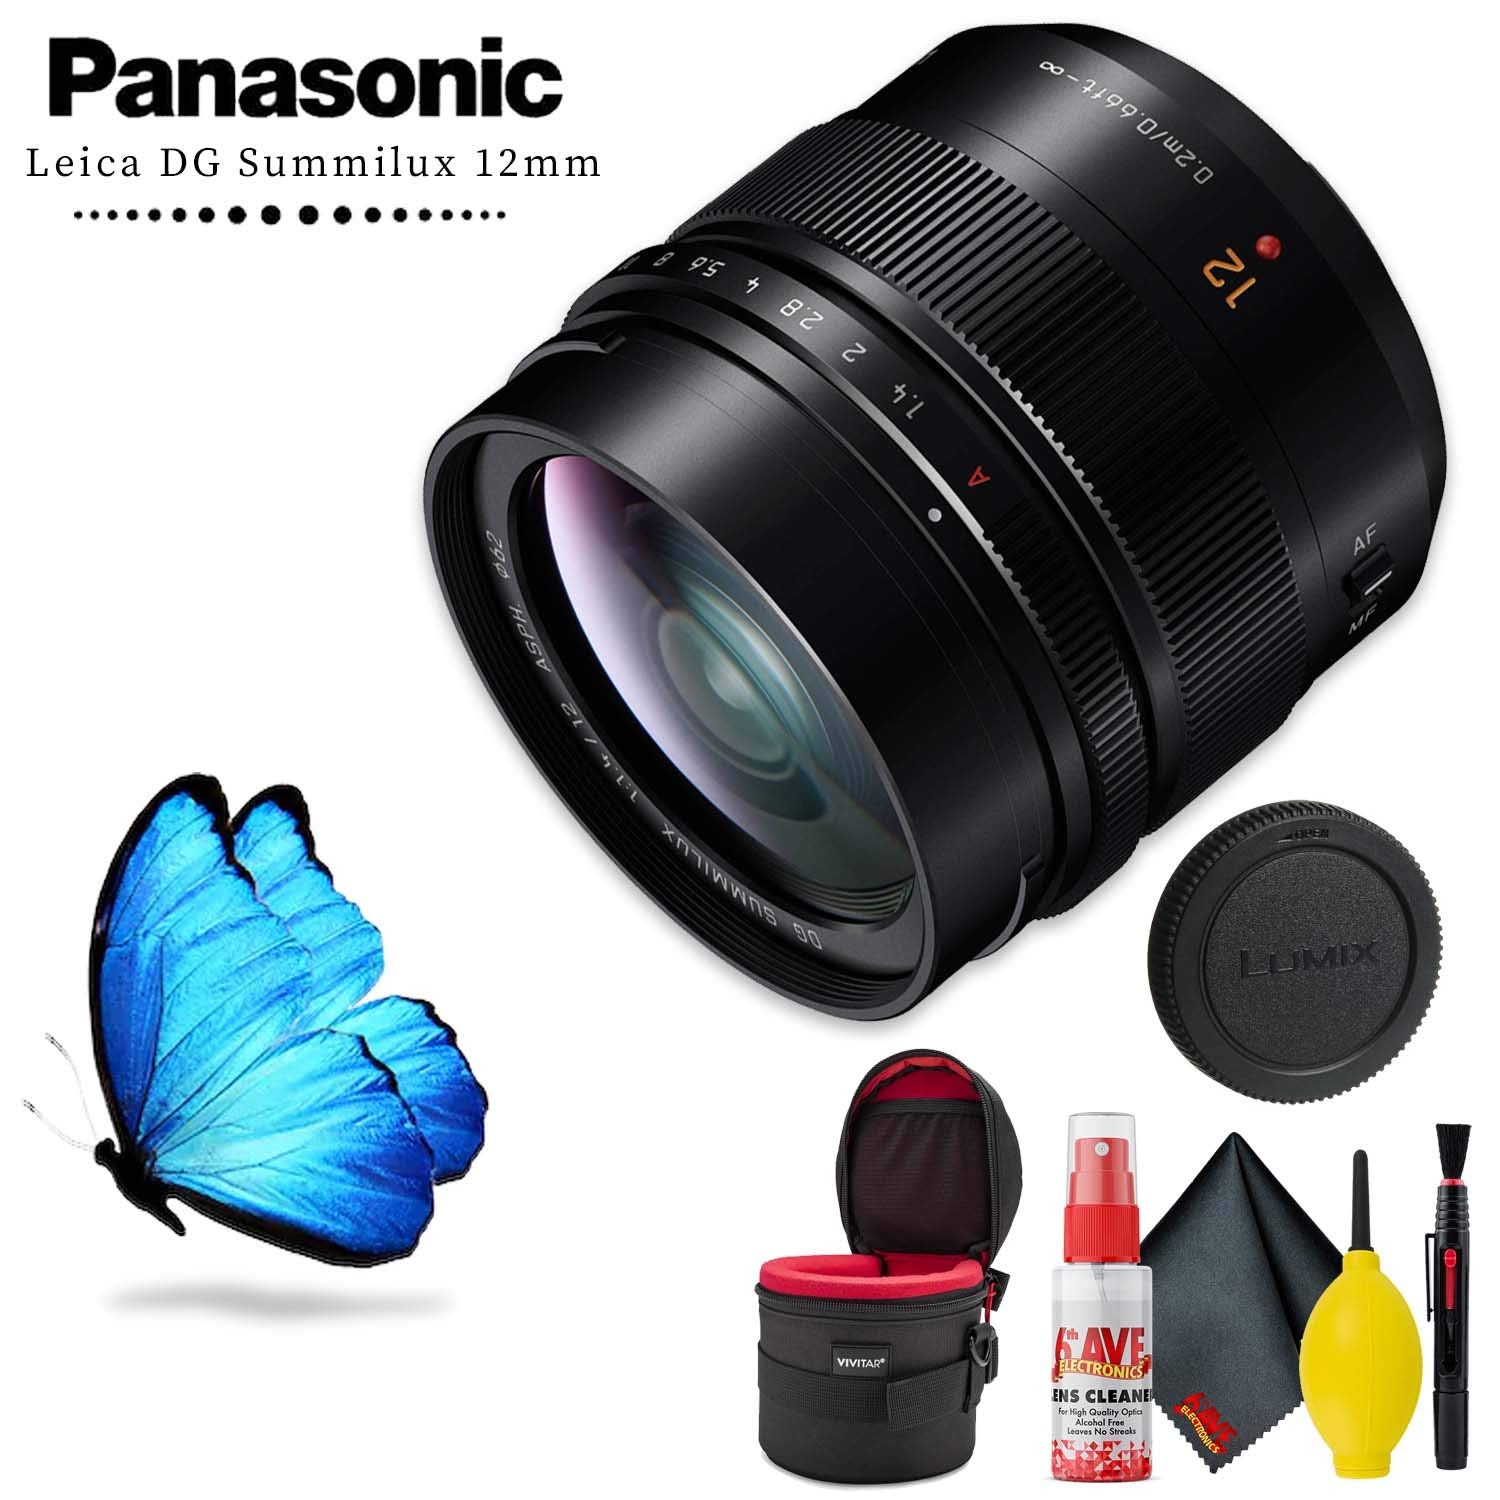 Panasonic Leica DG Summilux 12mm f/1.4 ASPH. Lens with Lens Case and Cleaning Kit